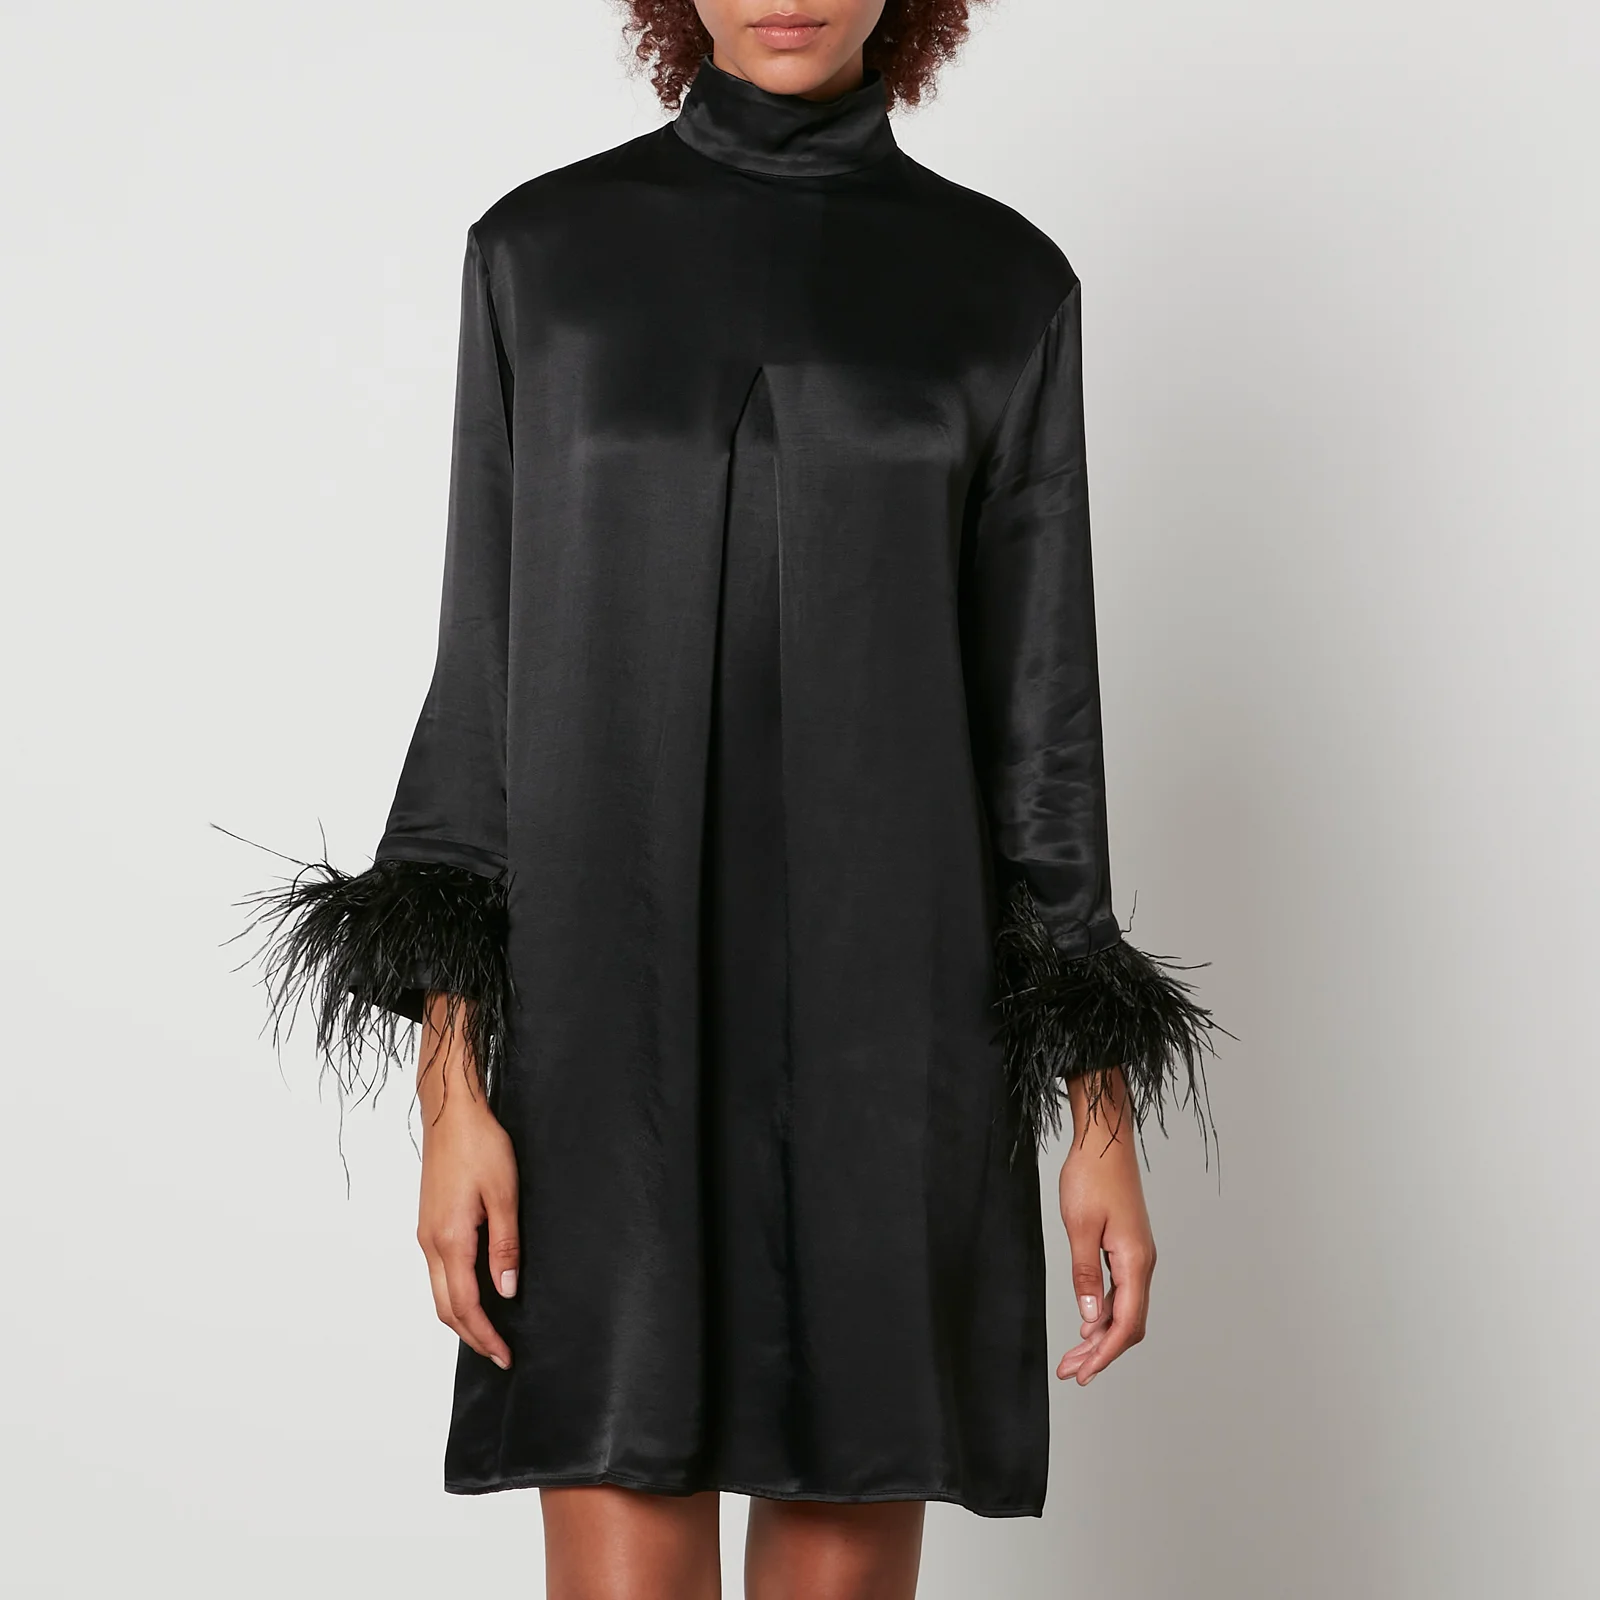 Sleeper Party Shirt Feather-Trimmed Satin Dress Image 1